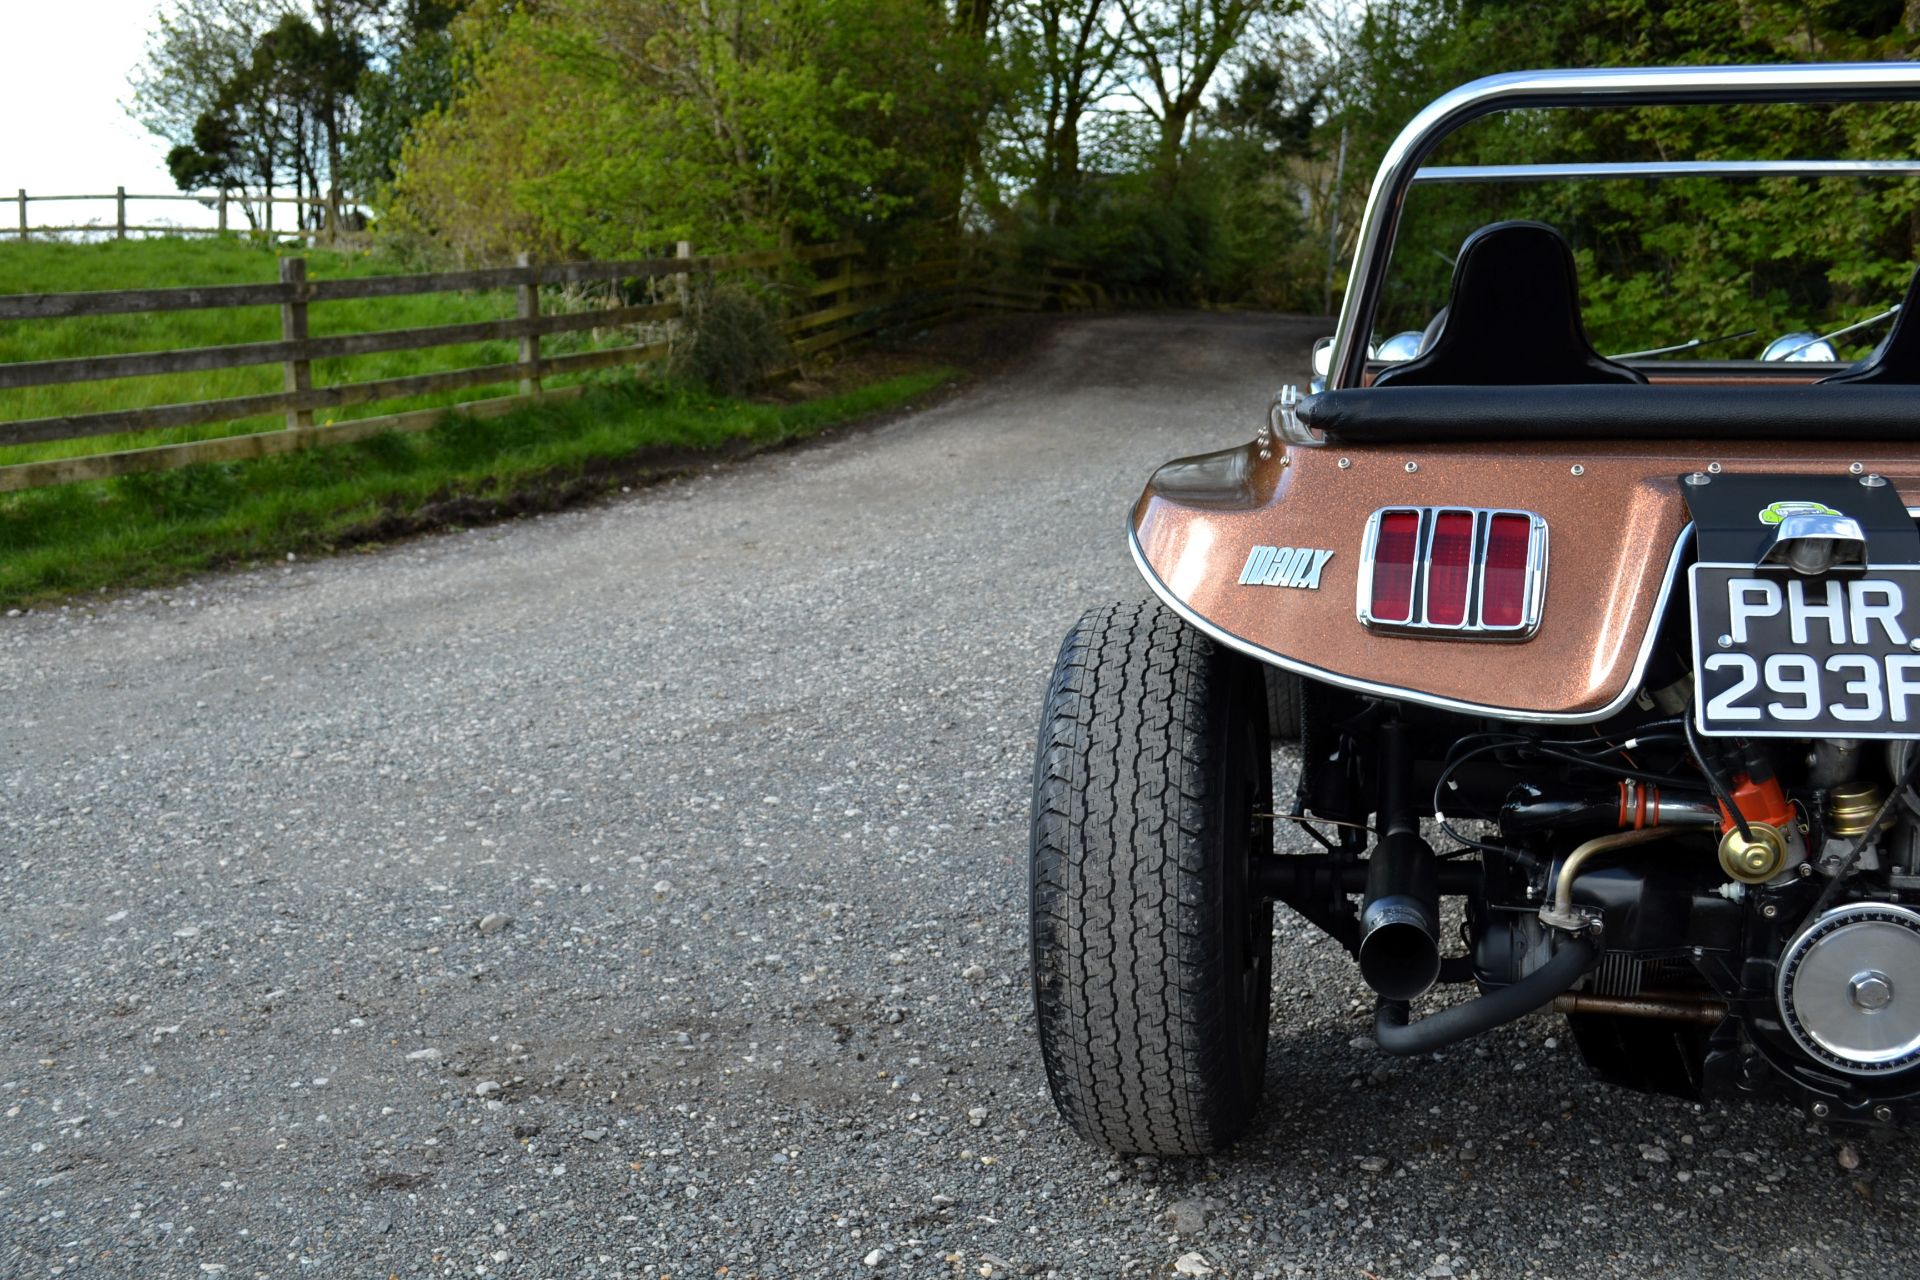 1968 Volkswagen Beach Buggy SWB ‘Meyers Manx Evocation’ No Reserve - Image 18 of 29